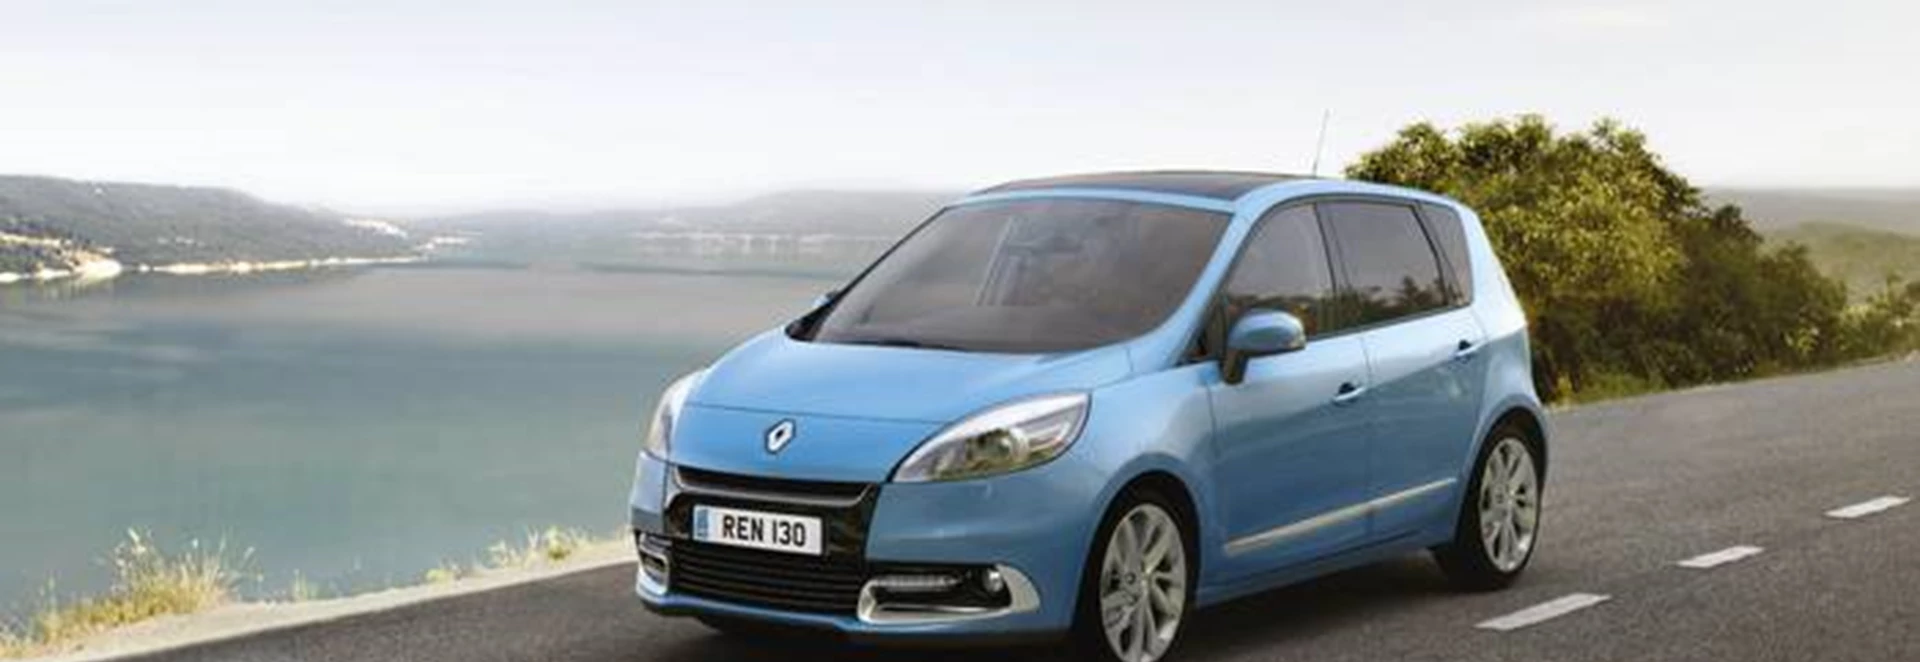 Renault Scenic, Grand Scenic 1.6 Energy DCI 130 first drive 